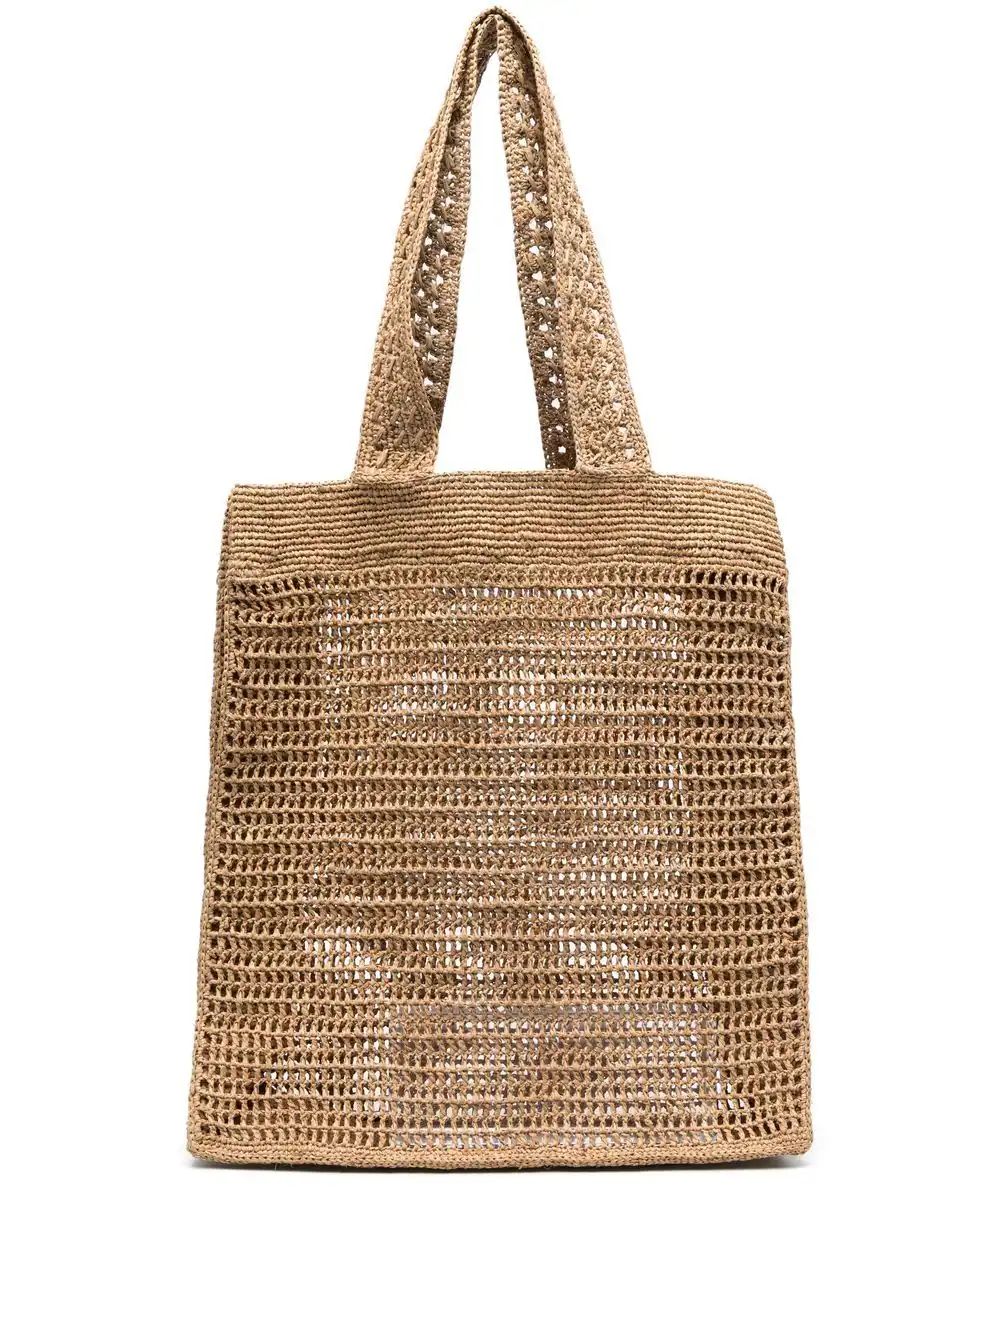 The DetailsIBELIVFasika raffia tote bagIBELIV celebrates the natural resources and ancient techni... | Farfetch Global